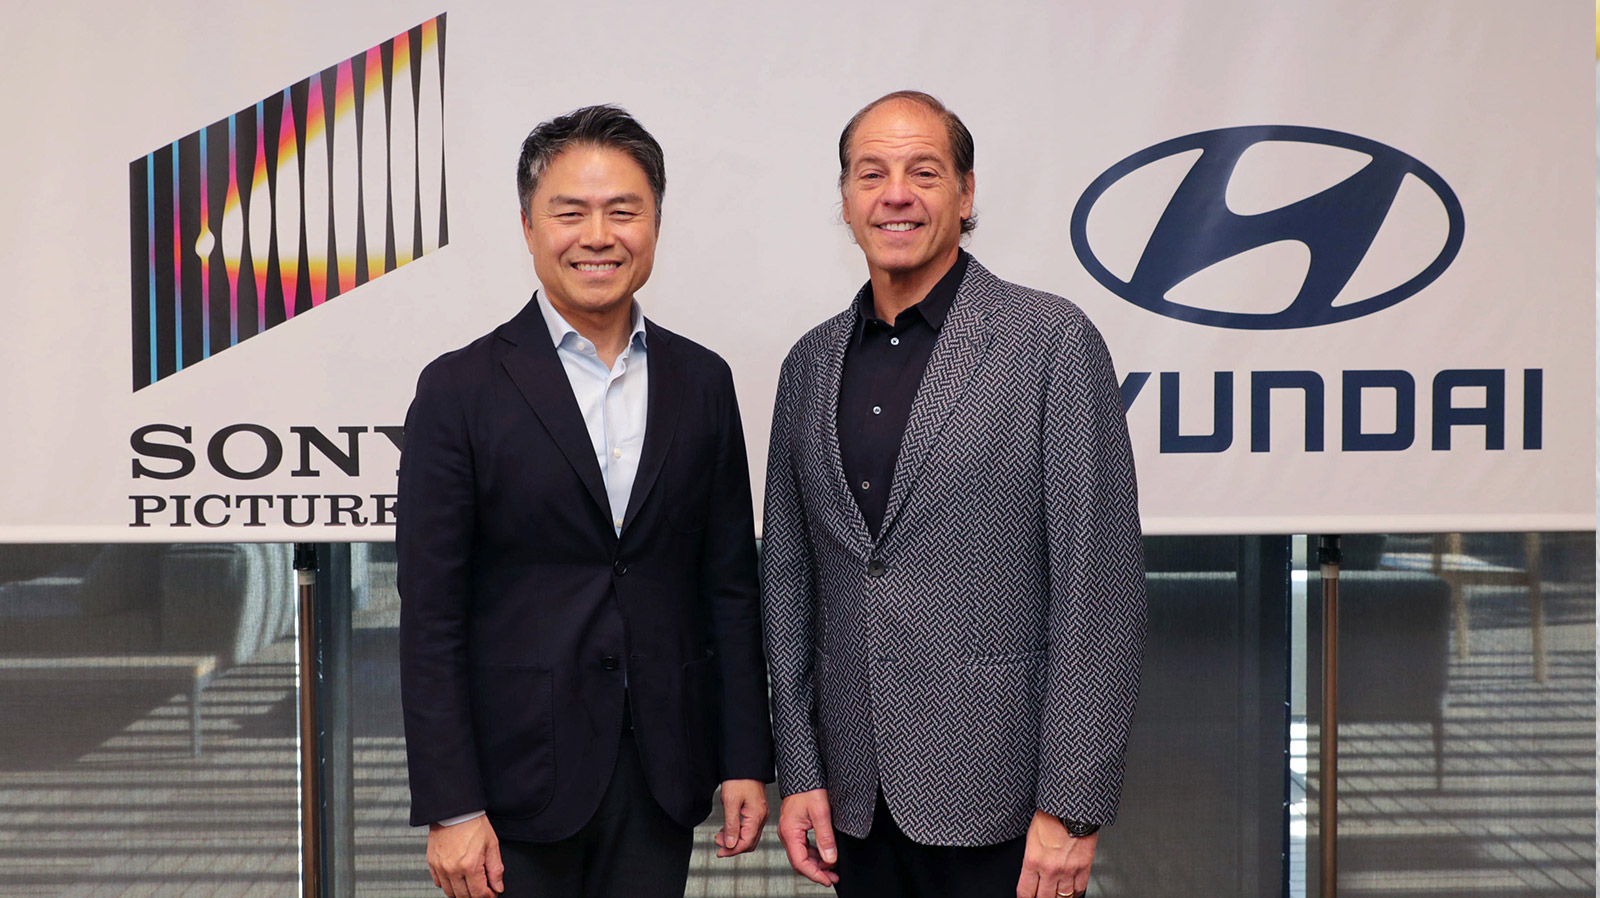 Hyundai Motor and Sony Pictures Entertainment